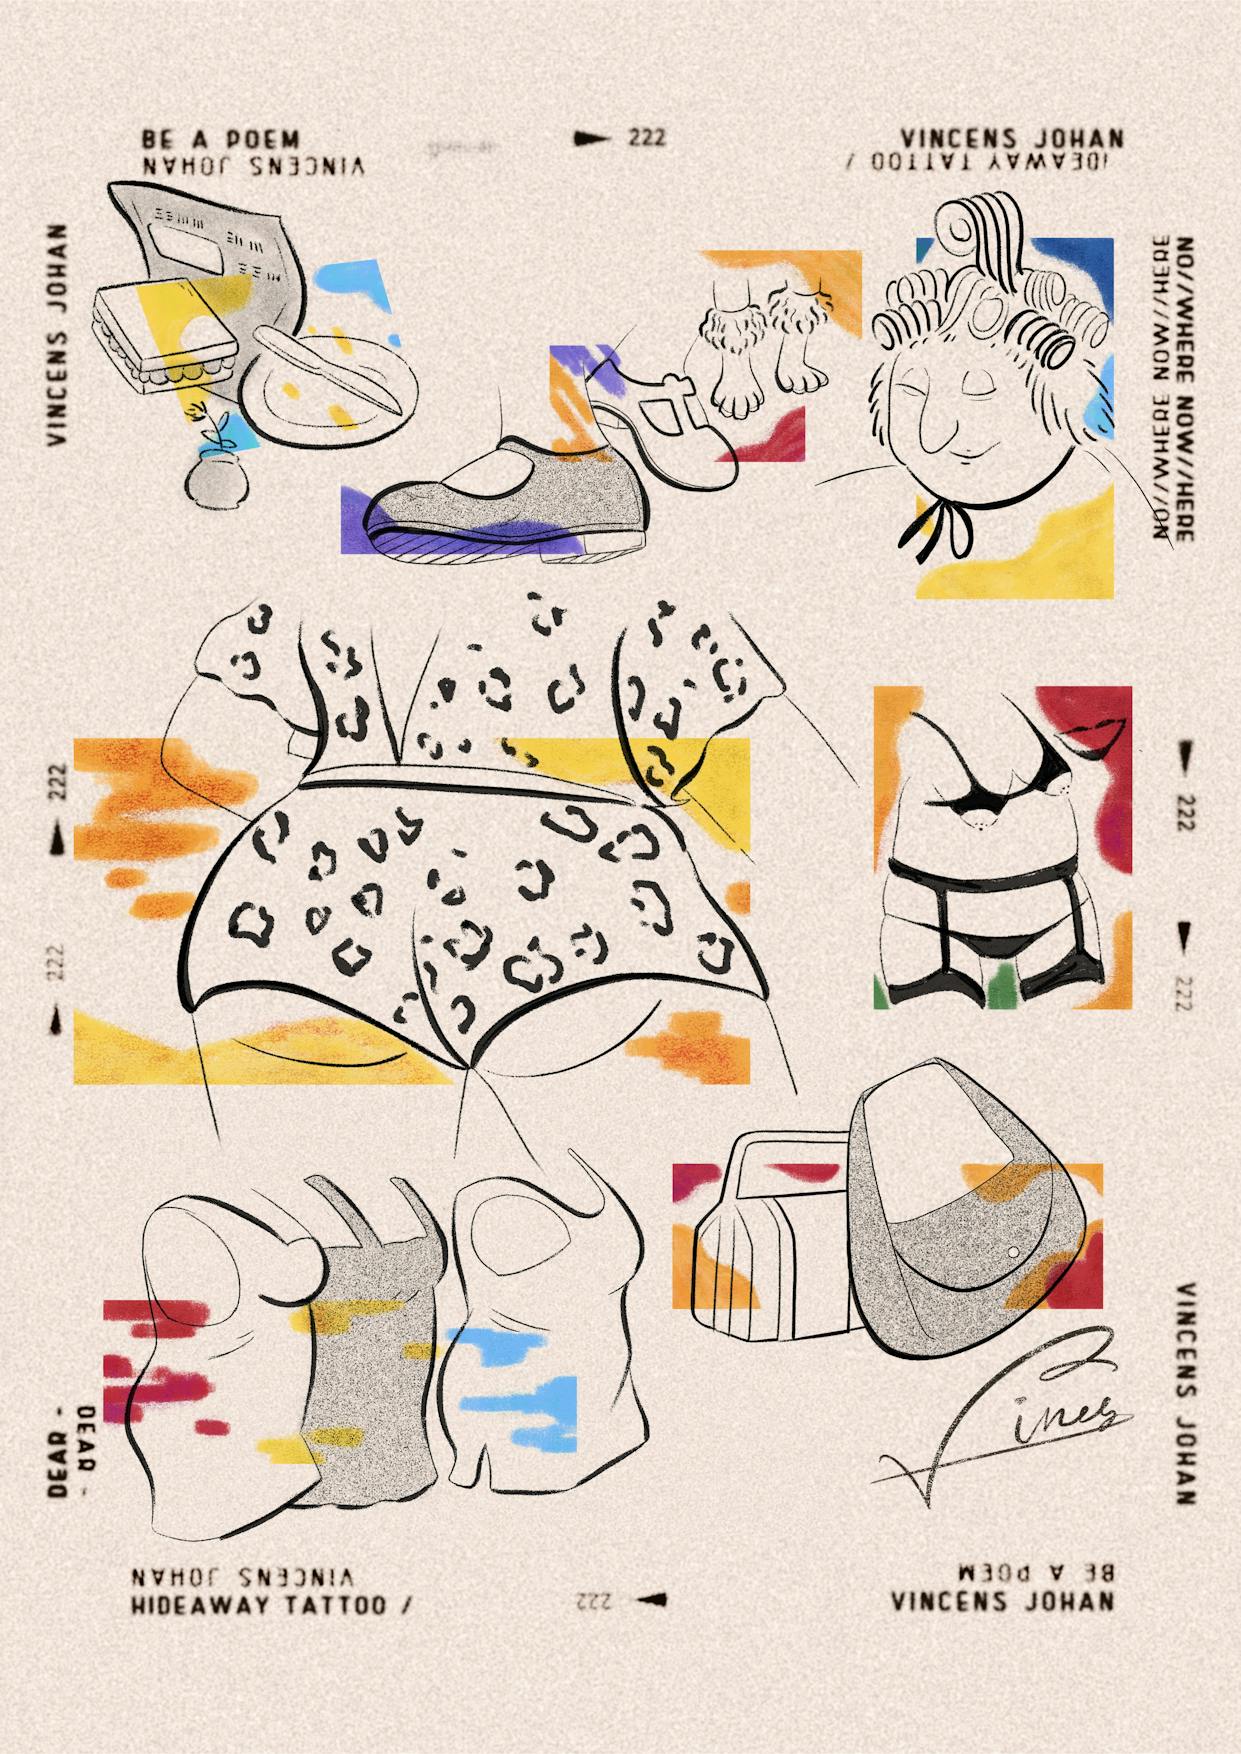 A flash tattoo sheet with various designs depicting body parts and characters with colourful splashes in the style of Beryl Cook